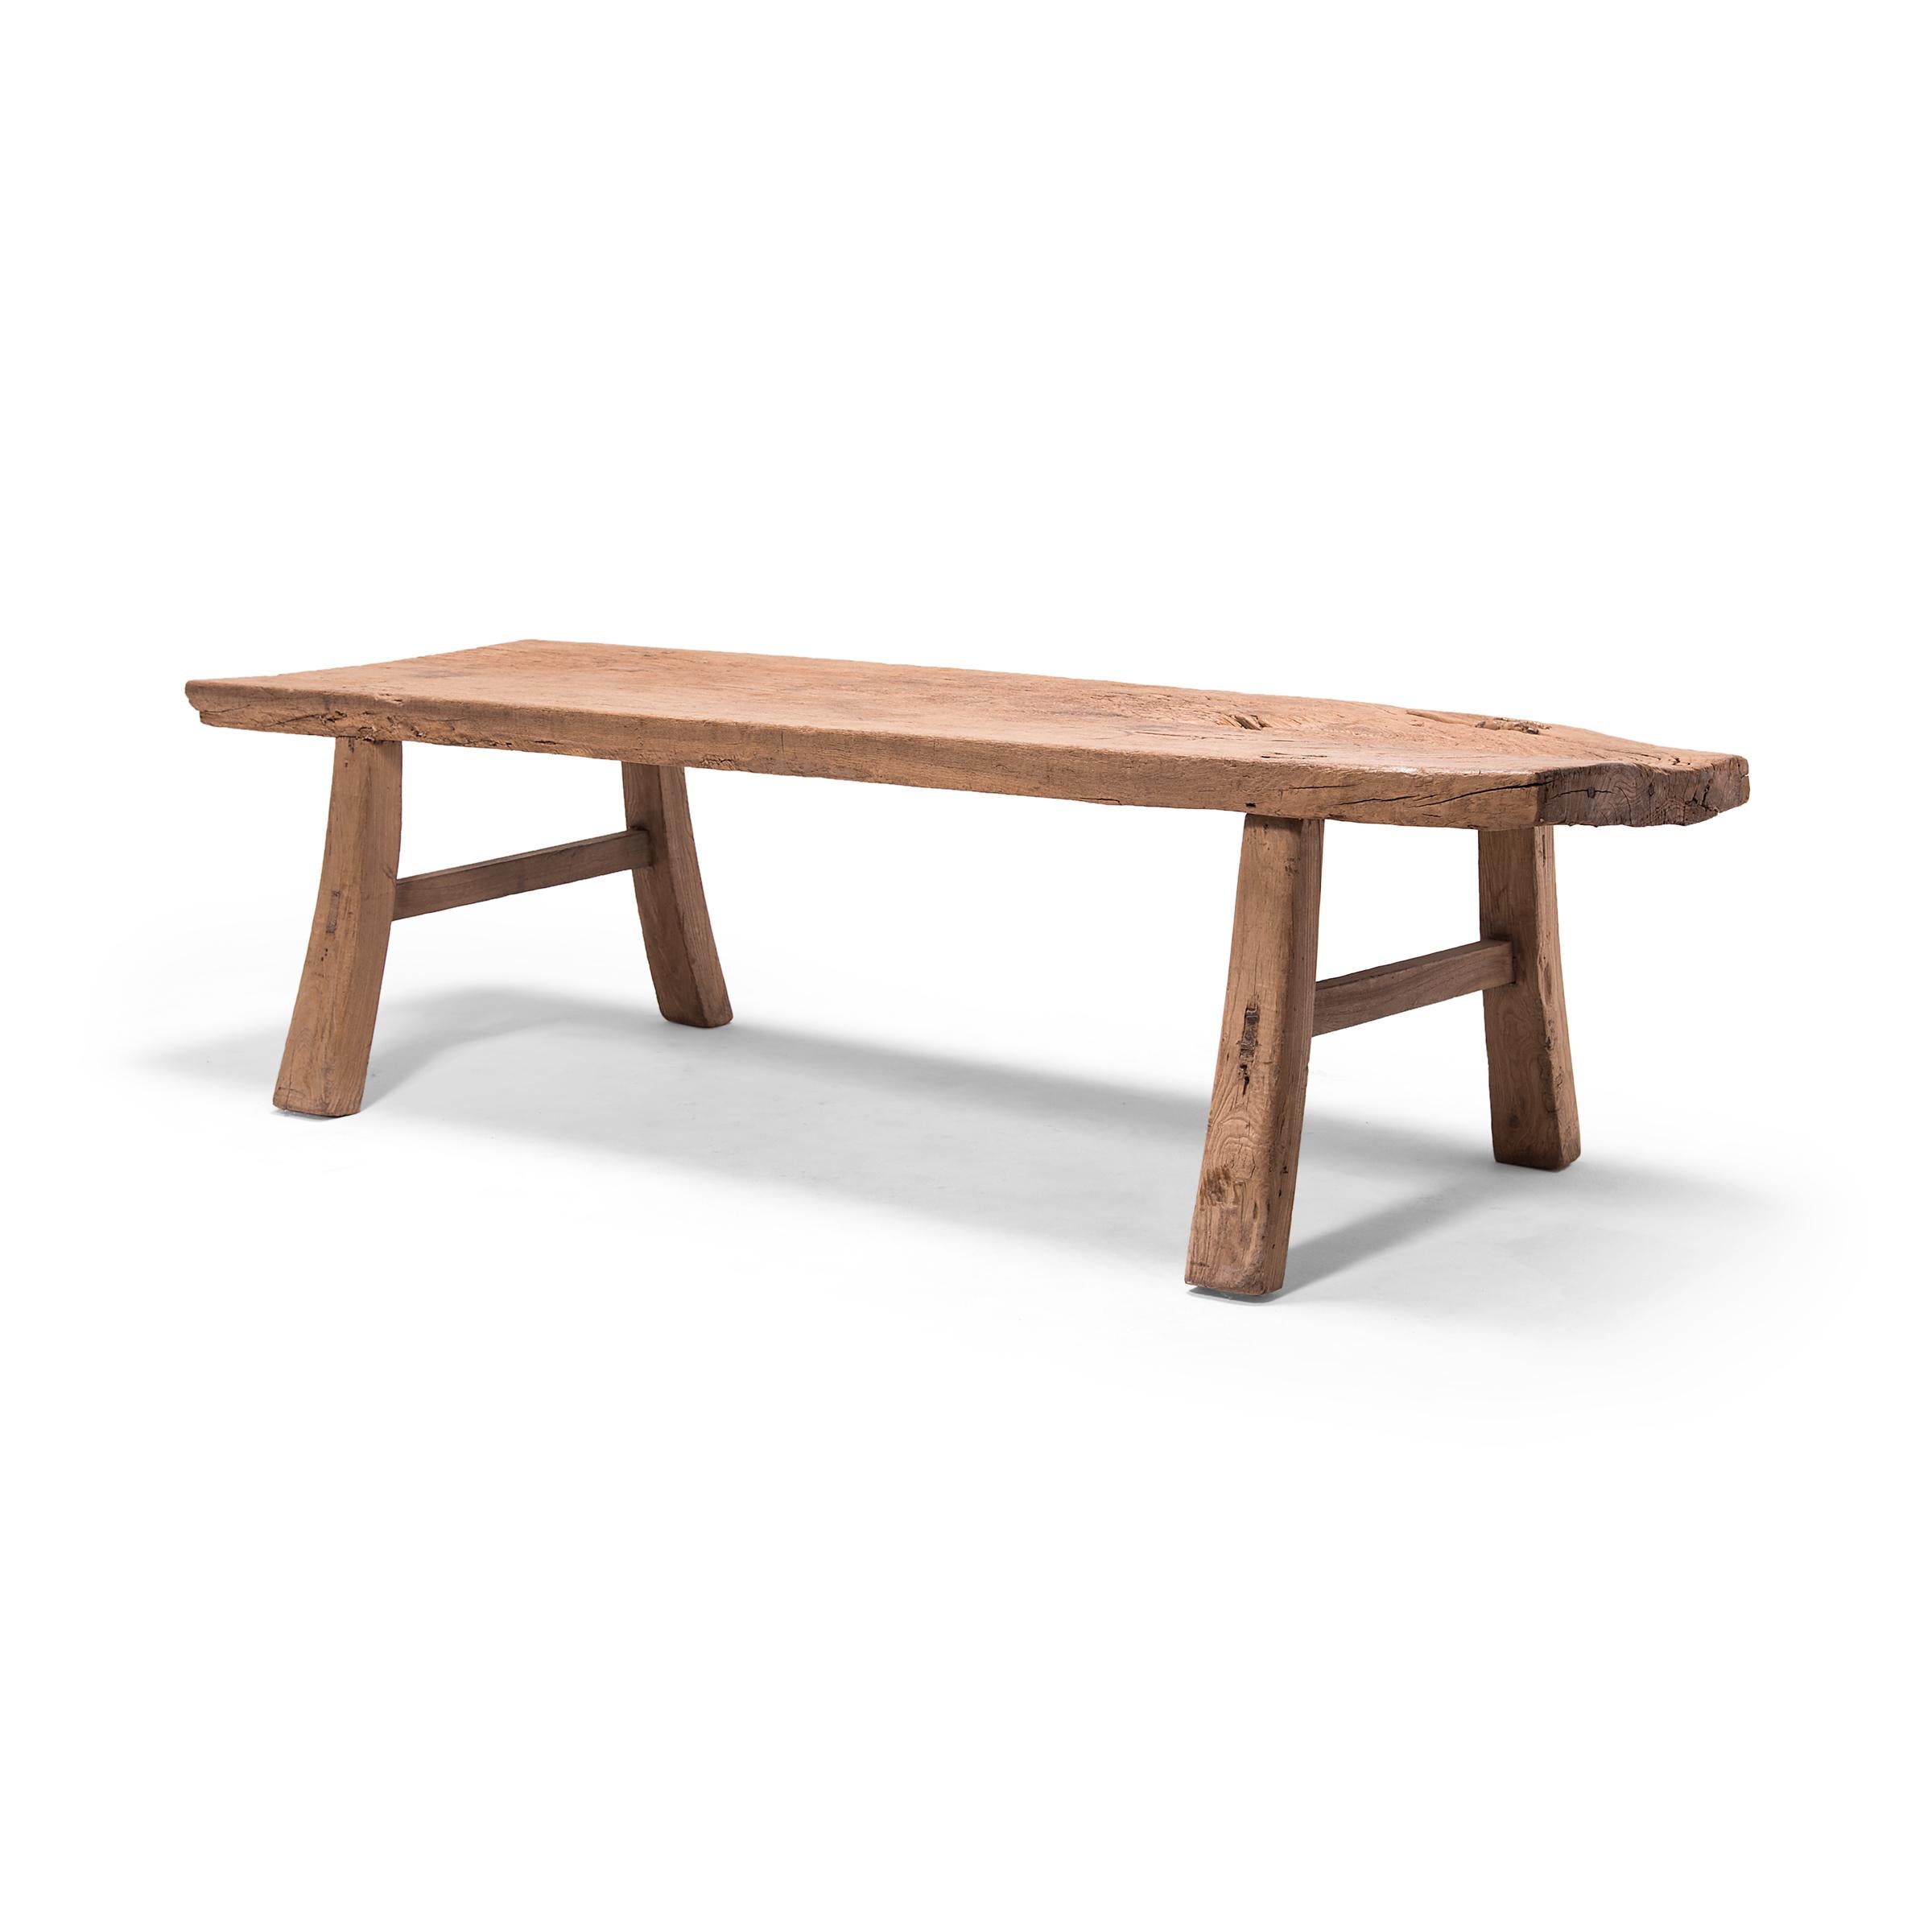 This provincial bench from China's Shanxi province features a plank-top surface supported by gently splayed legs with simple stretcher bars. Constructed with mortise-and-tenon joinery techniques, without the use of nails or screws, the broad bench